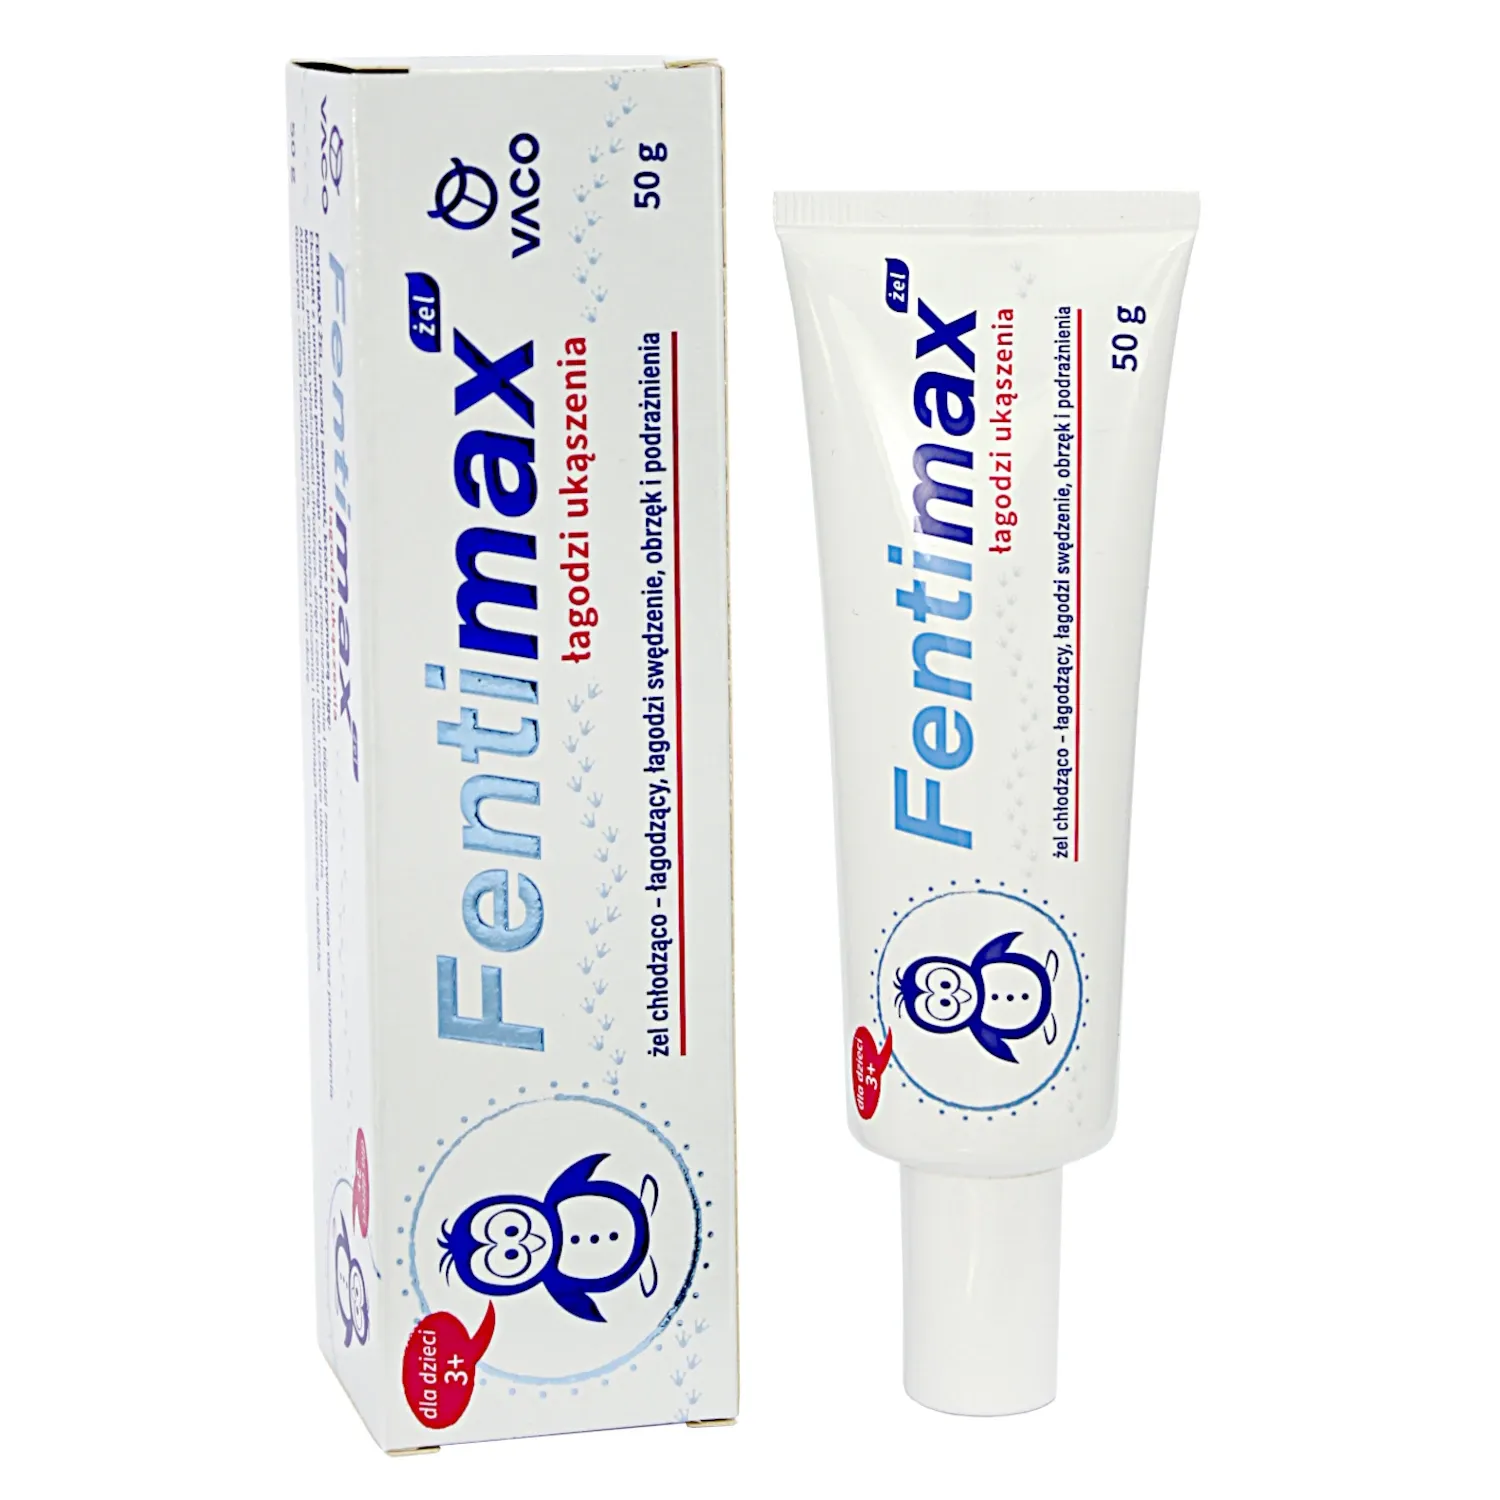 VACO FENTIMAX BITES – COOLING AND SOOTHING GEL 50G